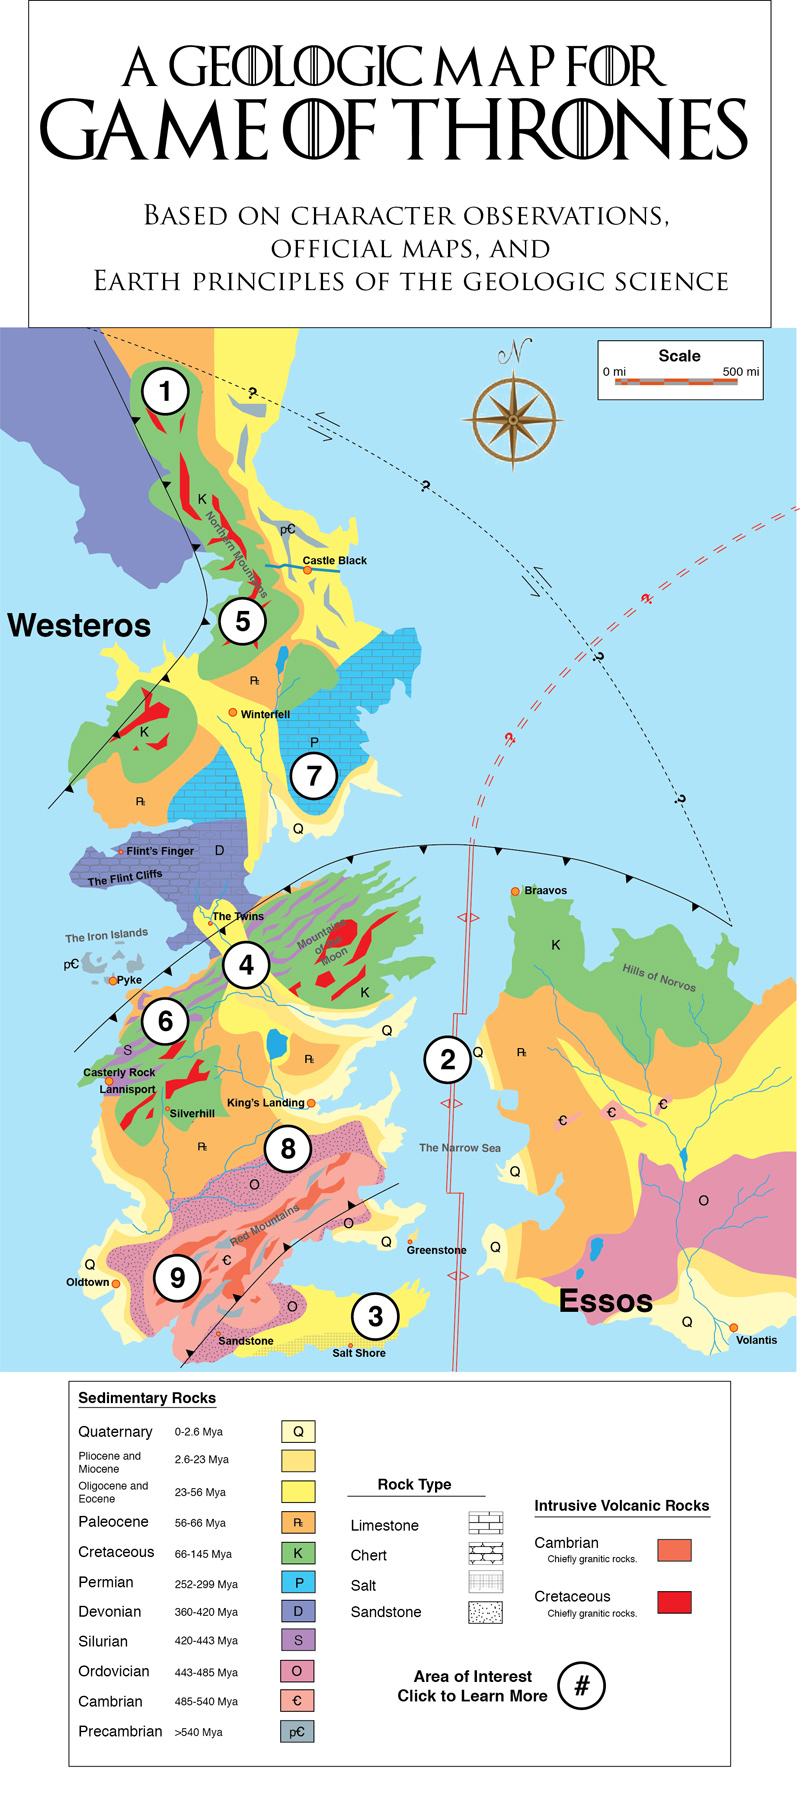 westeros is england